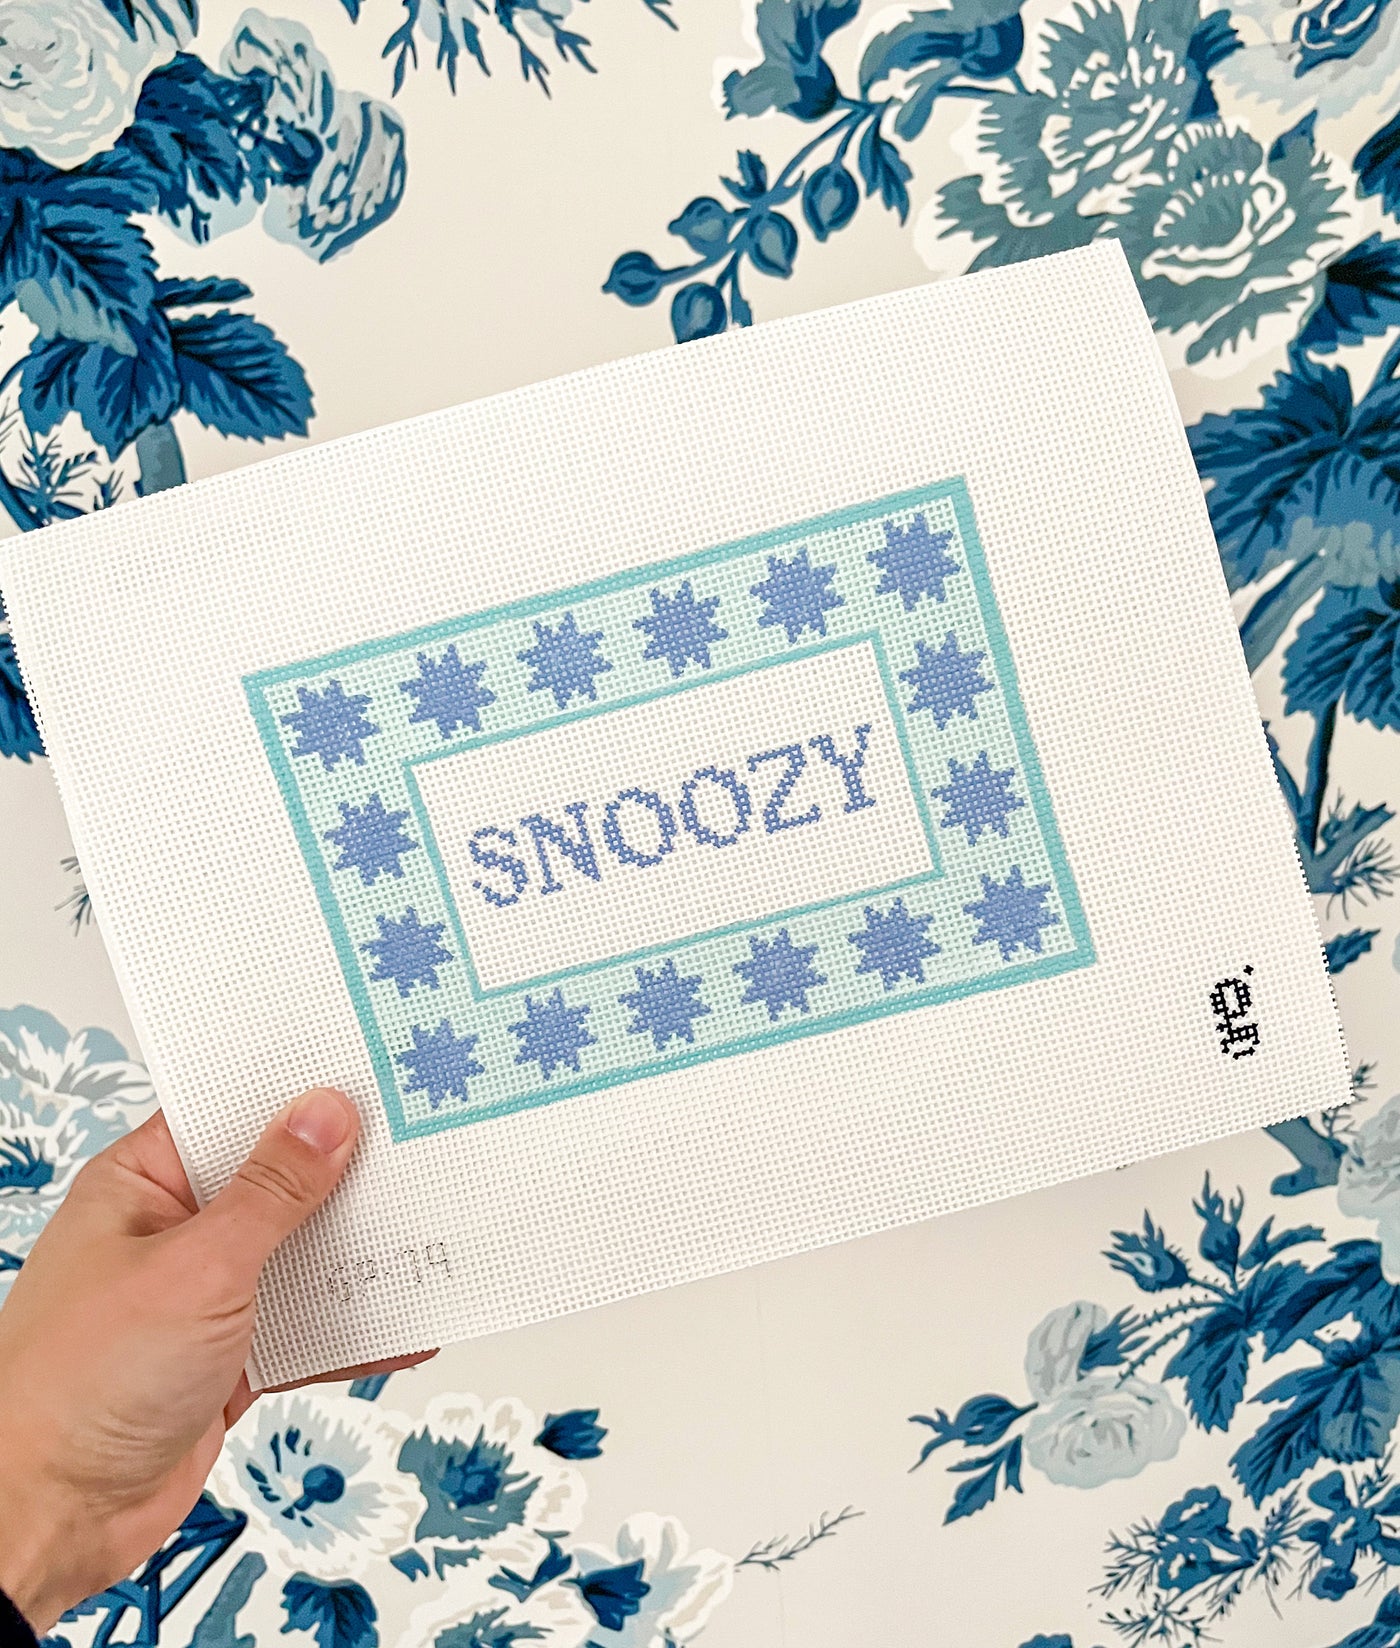 White needlepoint canvas with a aqua rectangular border with 6 pointed periwinkle stars surrounds a white center with the word "SNOOZY" in peri winkle text